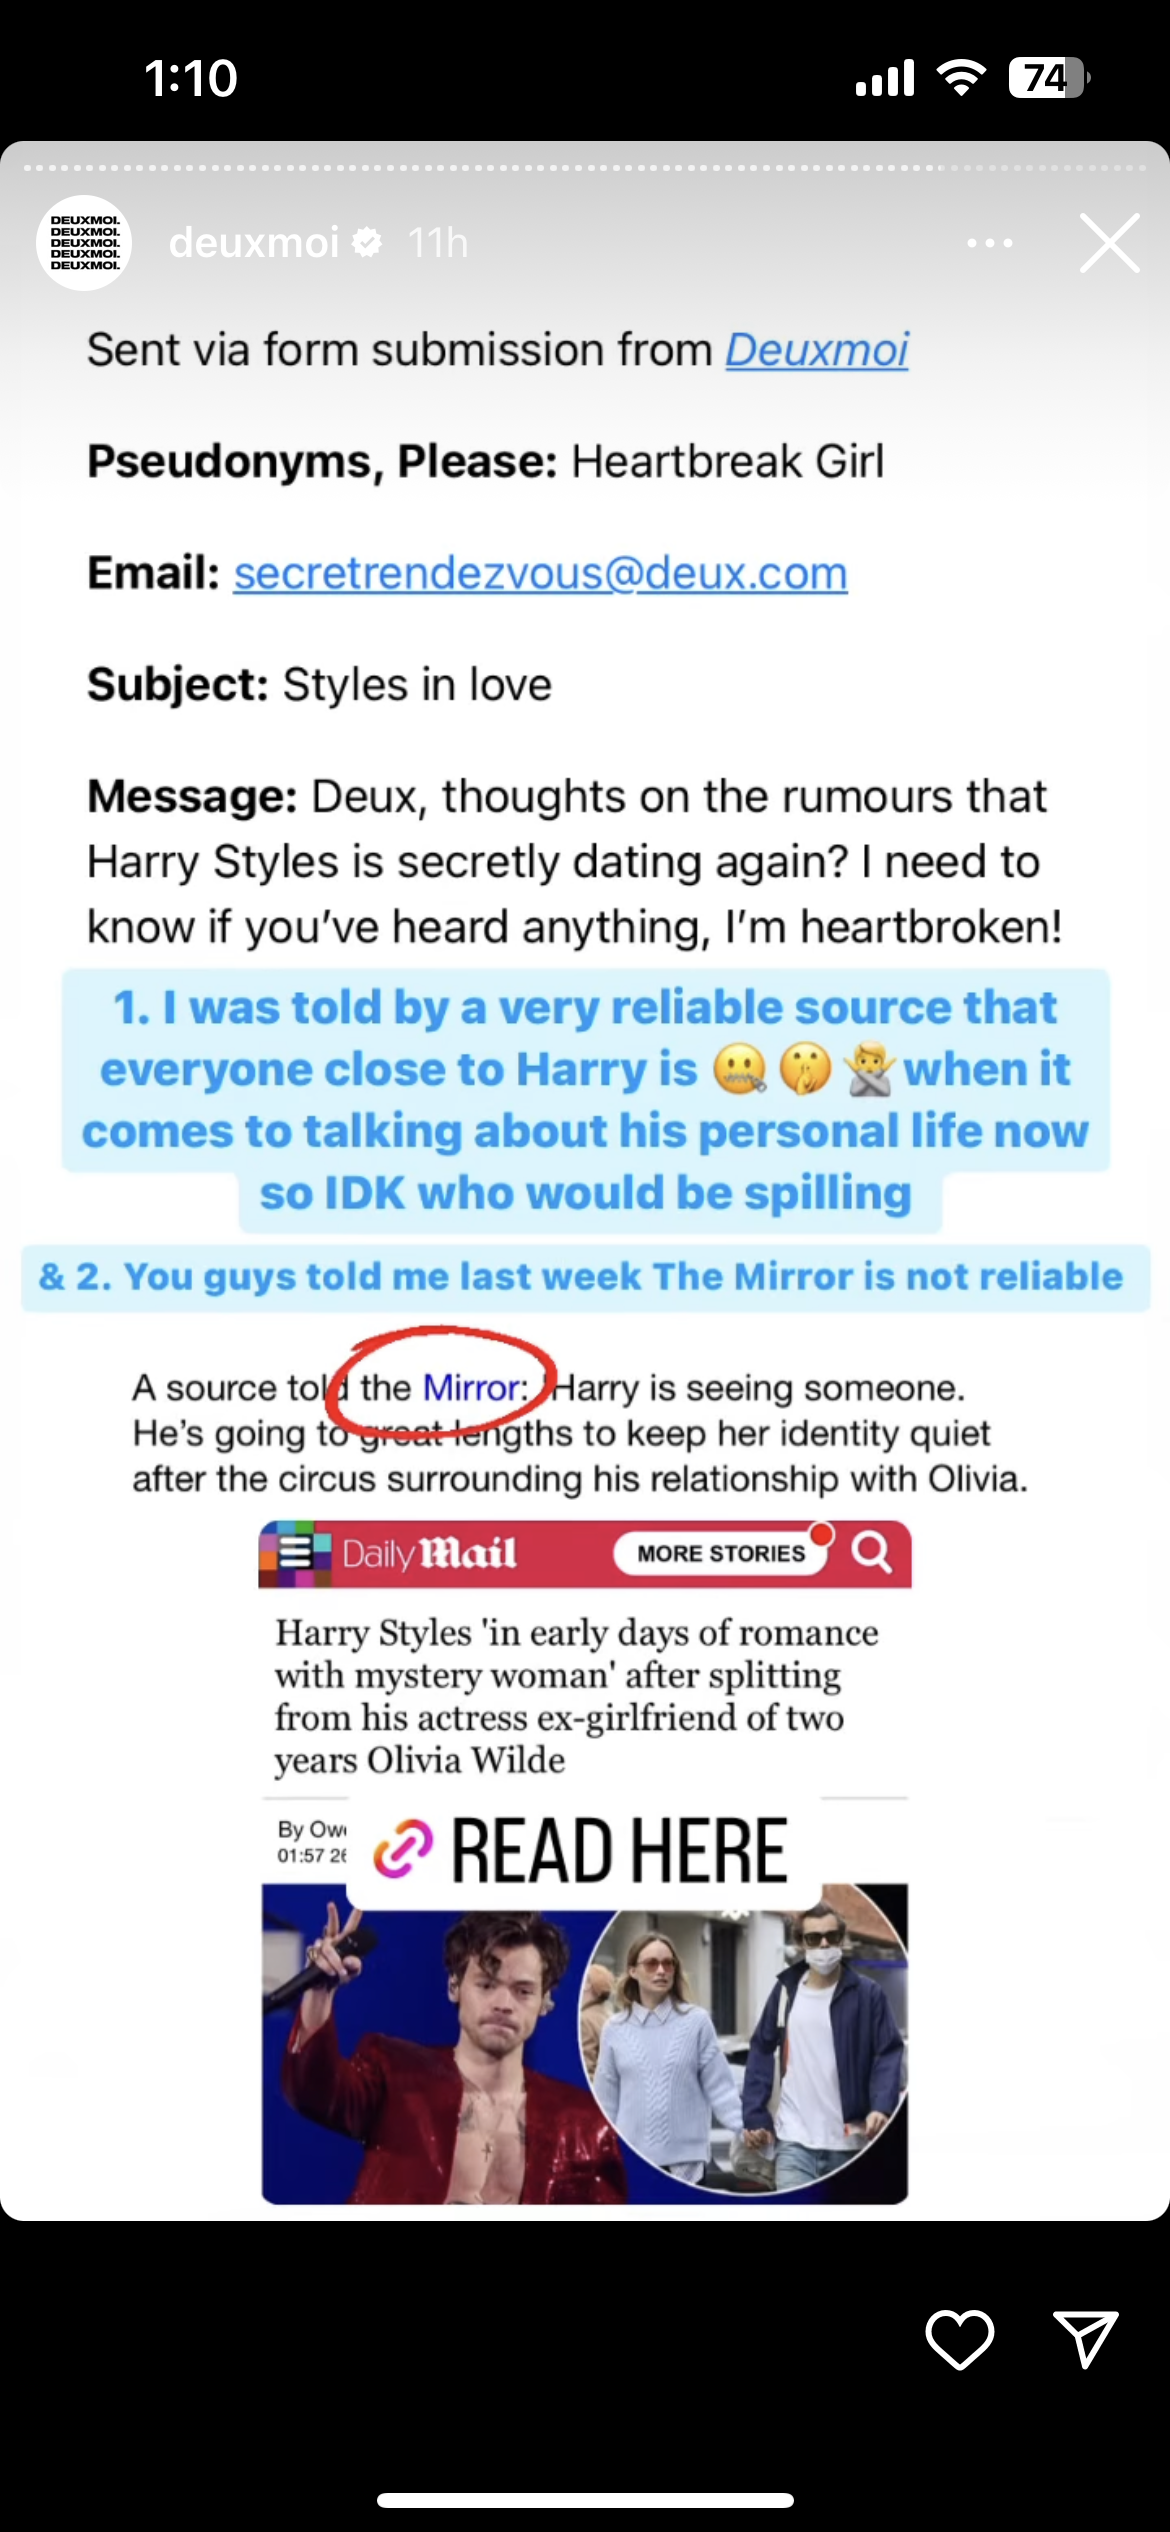 Deuxmoi's thoughts on Harry Styles' dating again. 